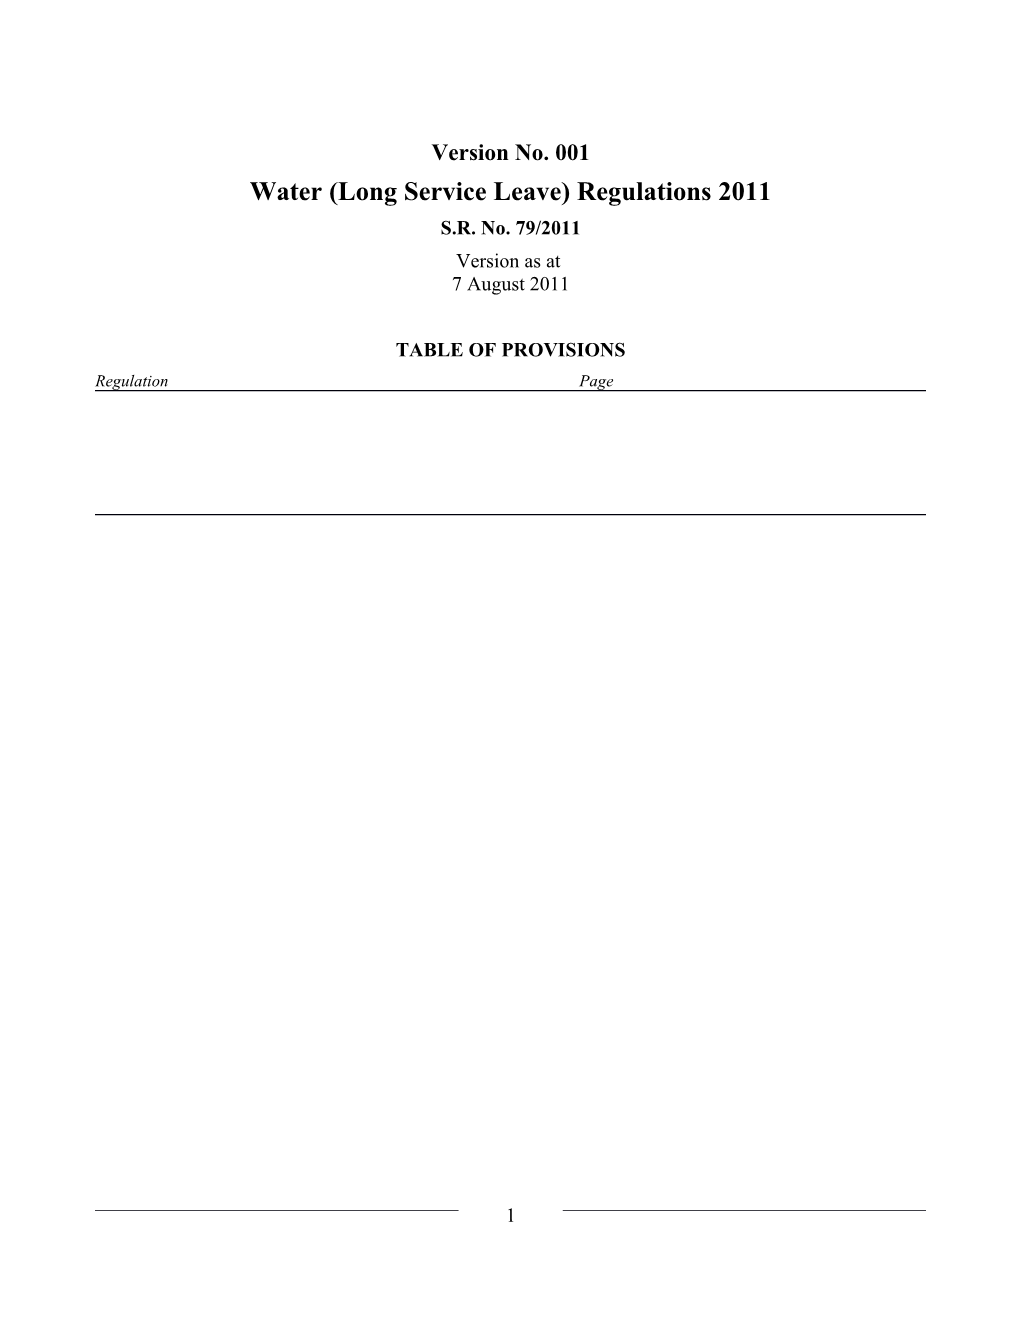 Water (Long Service Leave) Regulations 2011